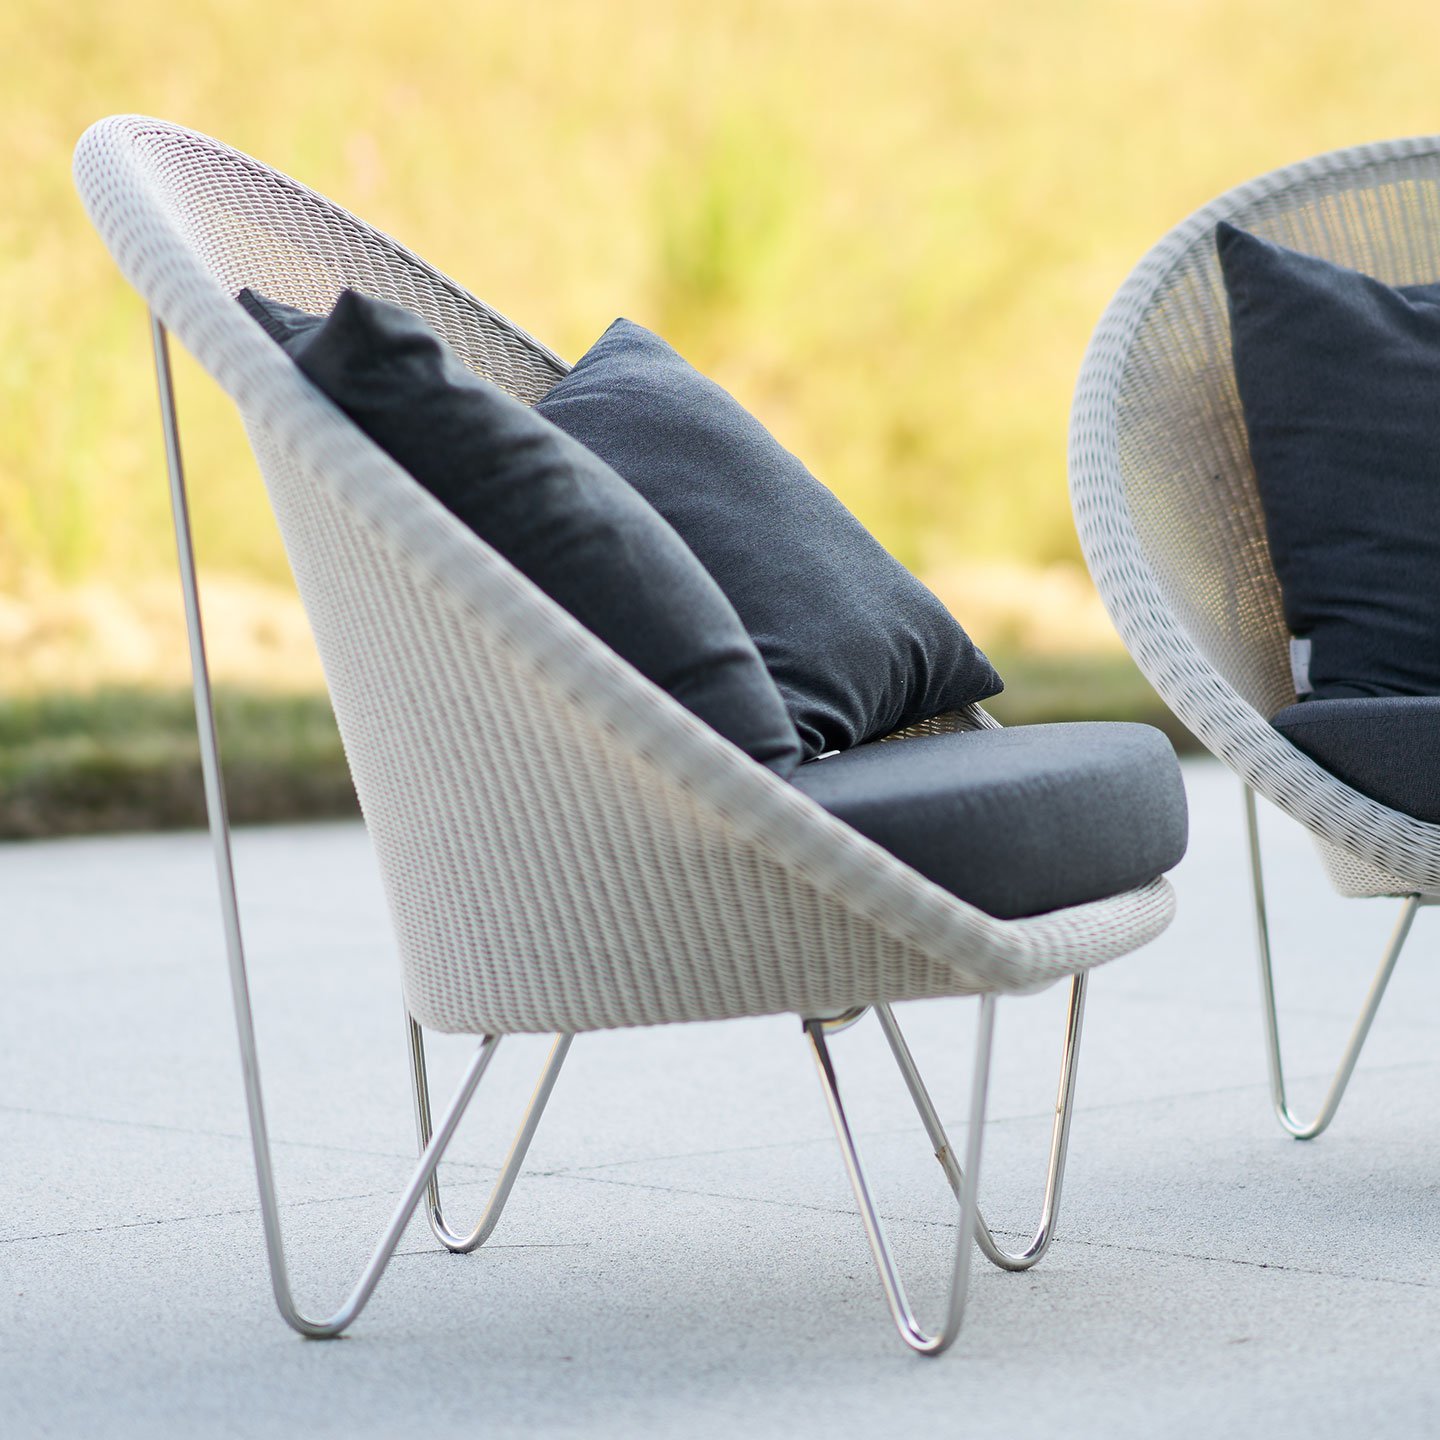 Haworth Gigi II lounge chairs in off white color with black cushions in an outdoor space side view